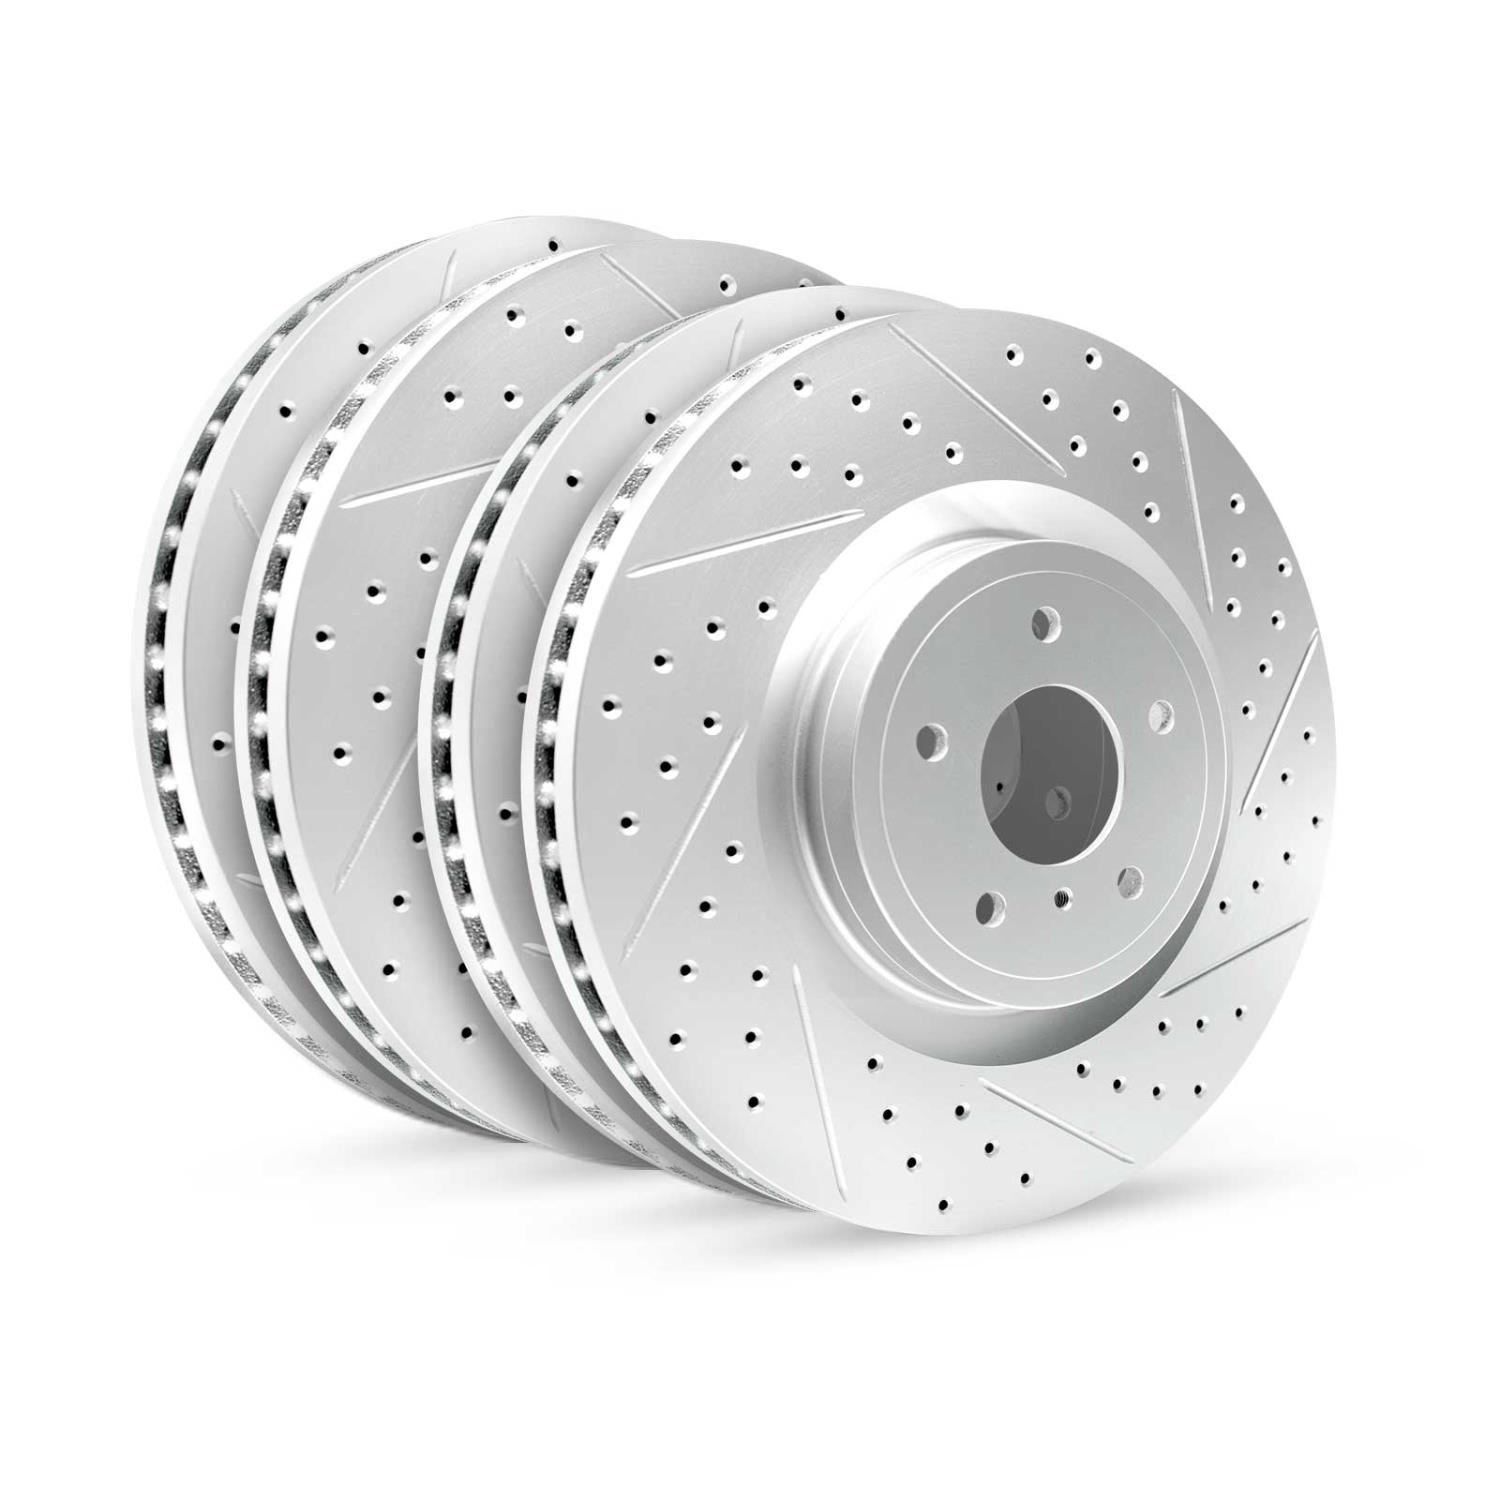 GEO-Carbon Drilled/Slotted Rotors, 1999-2007 Ford/Mazda,